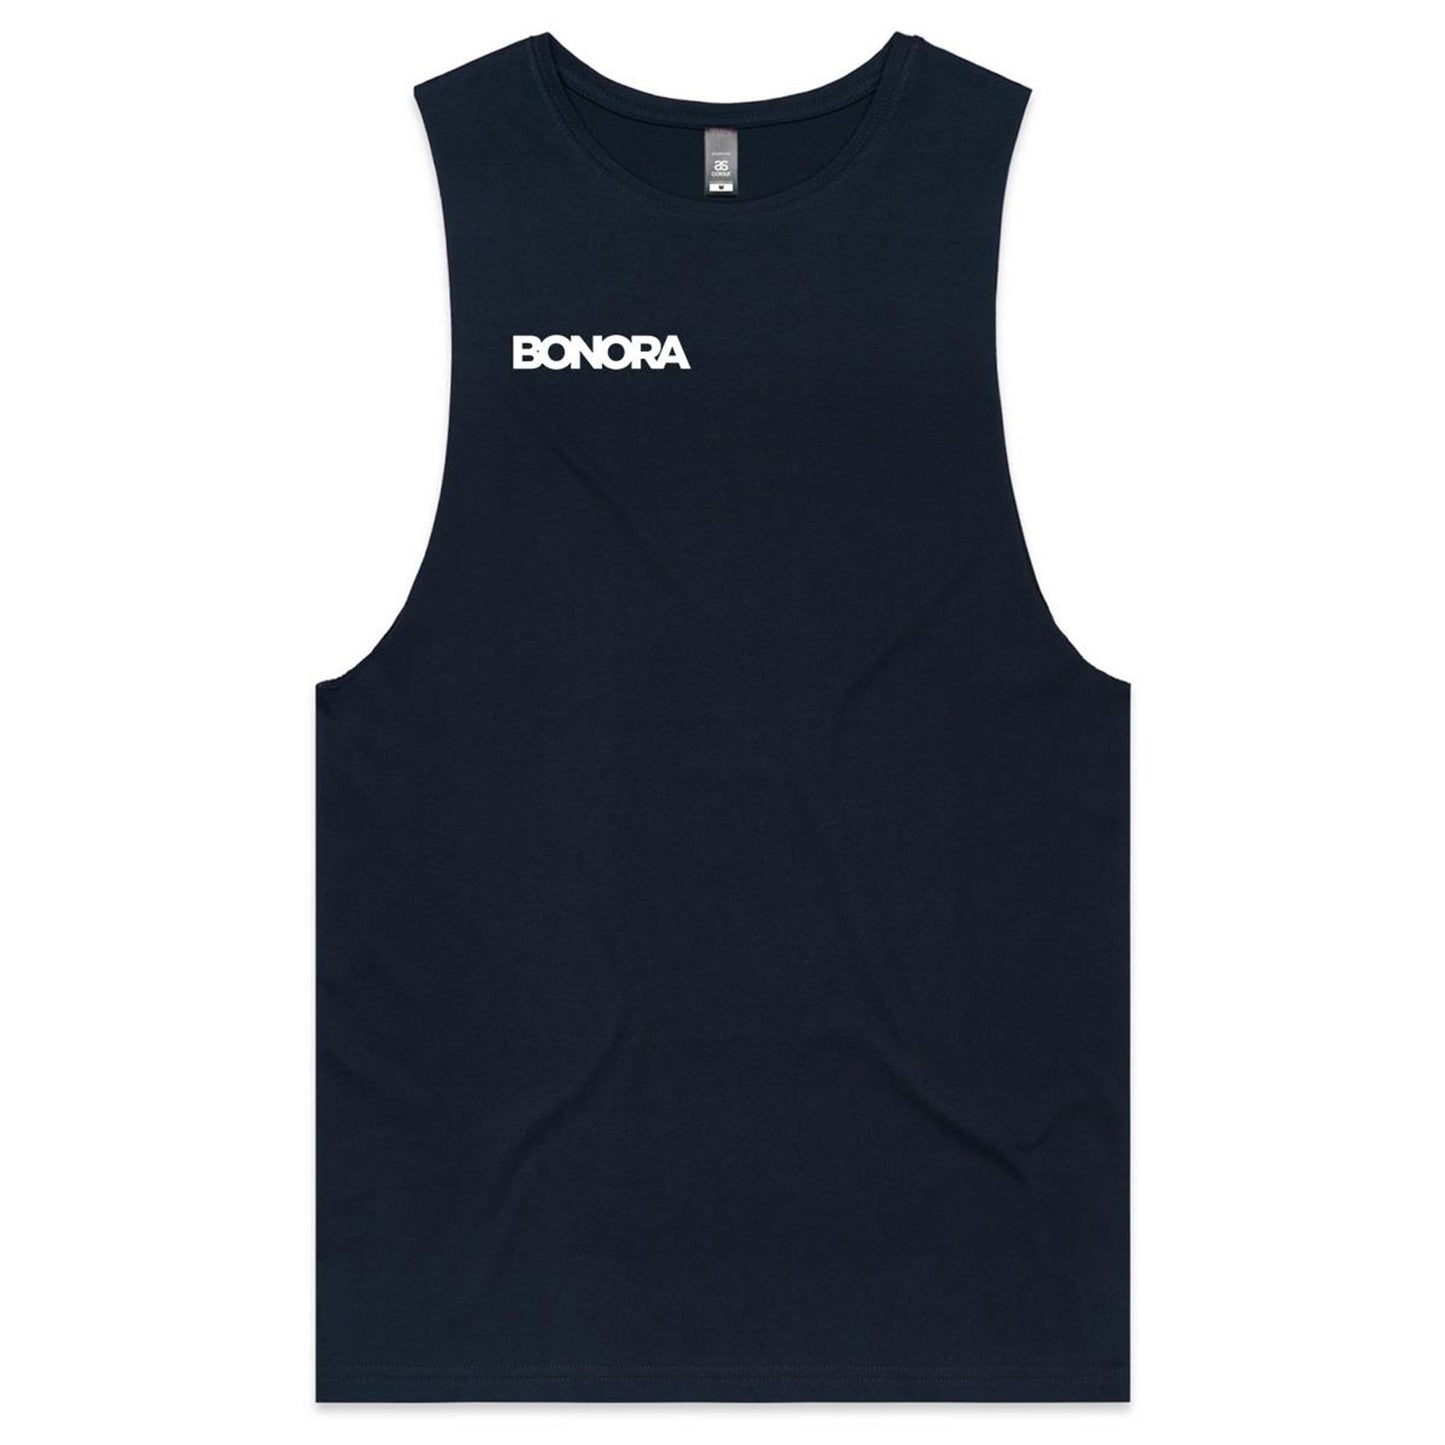 Bonora Comfy Muscle Tank